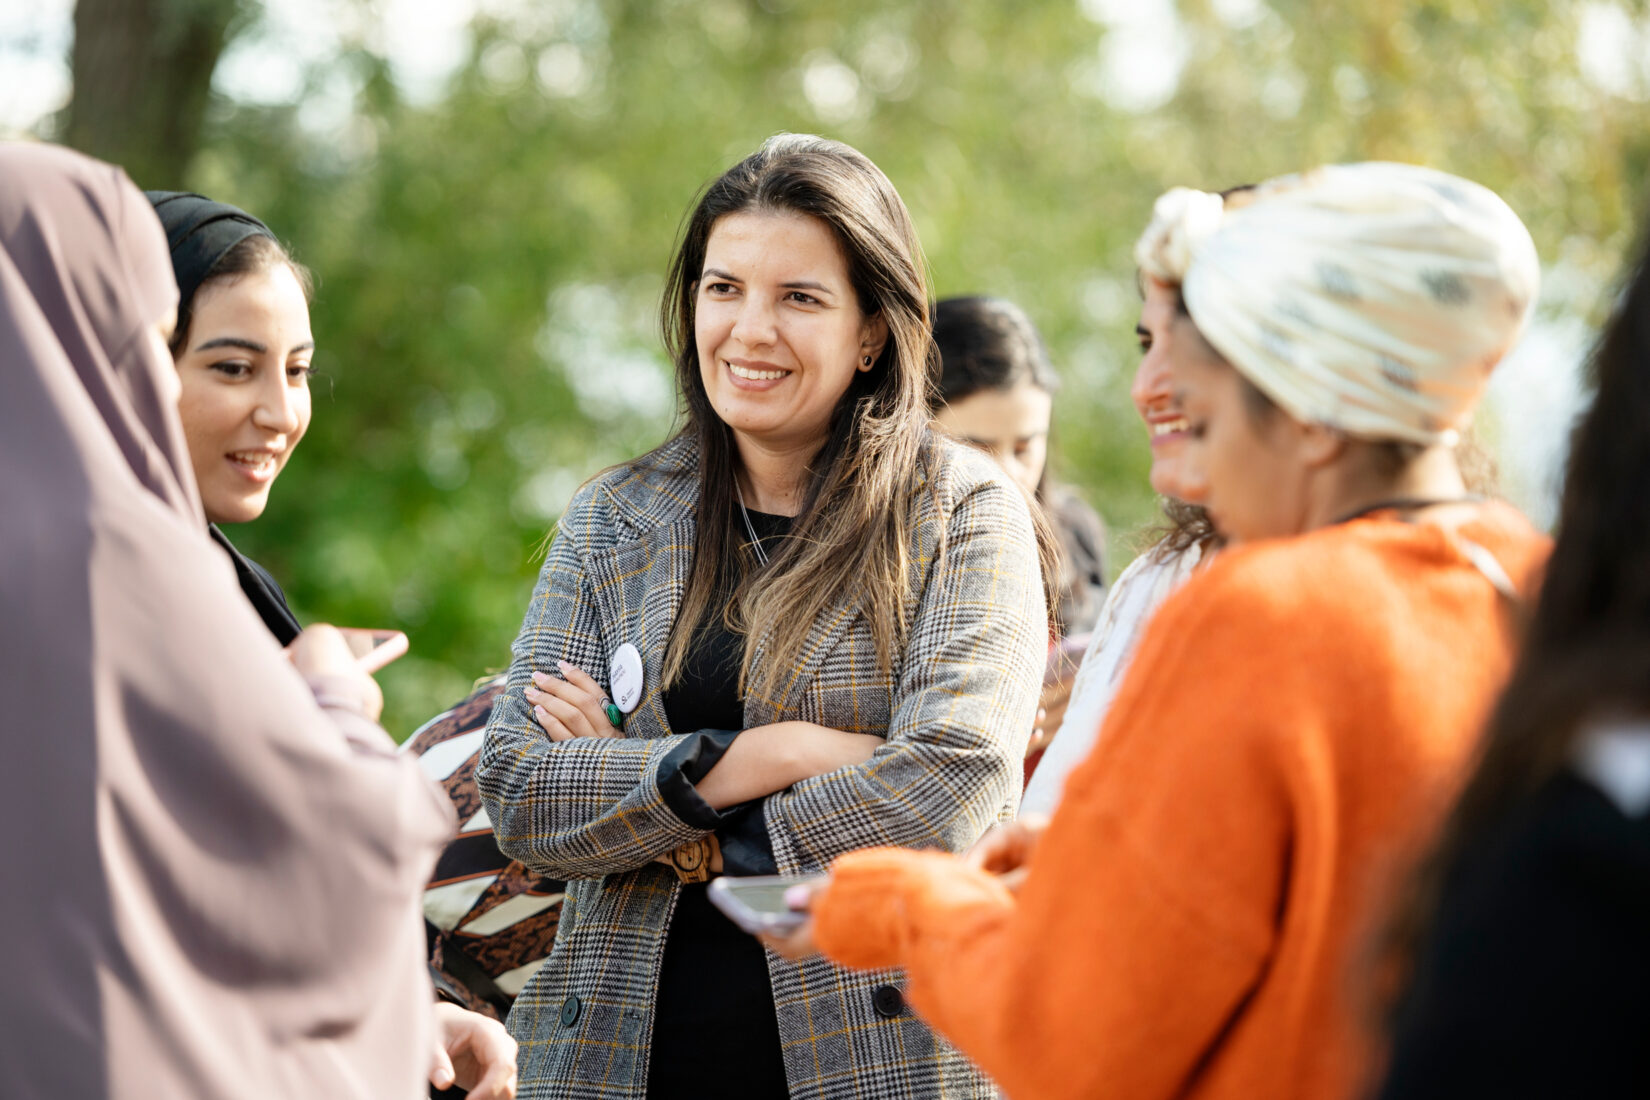 A group of women is standing outside in the sun and having a discussion. They look happy and connected.